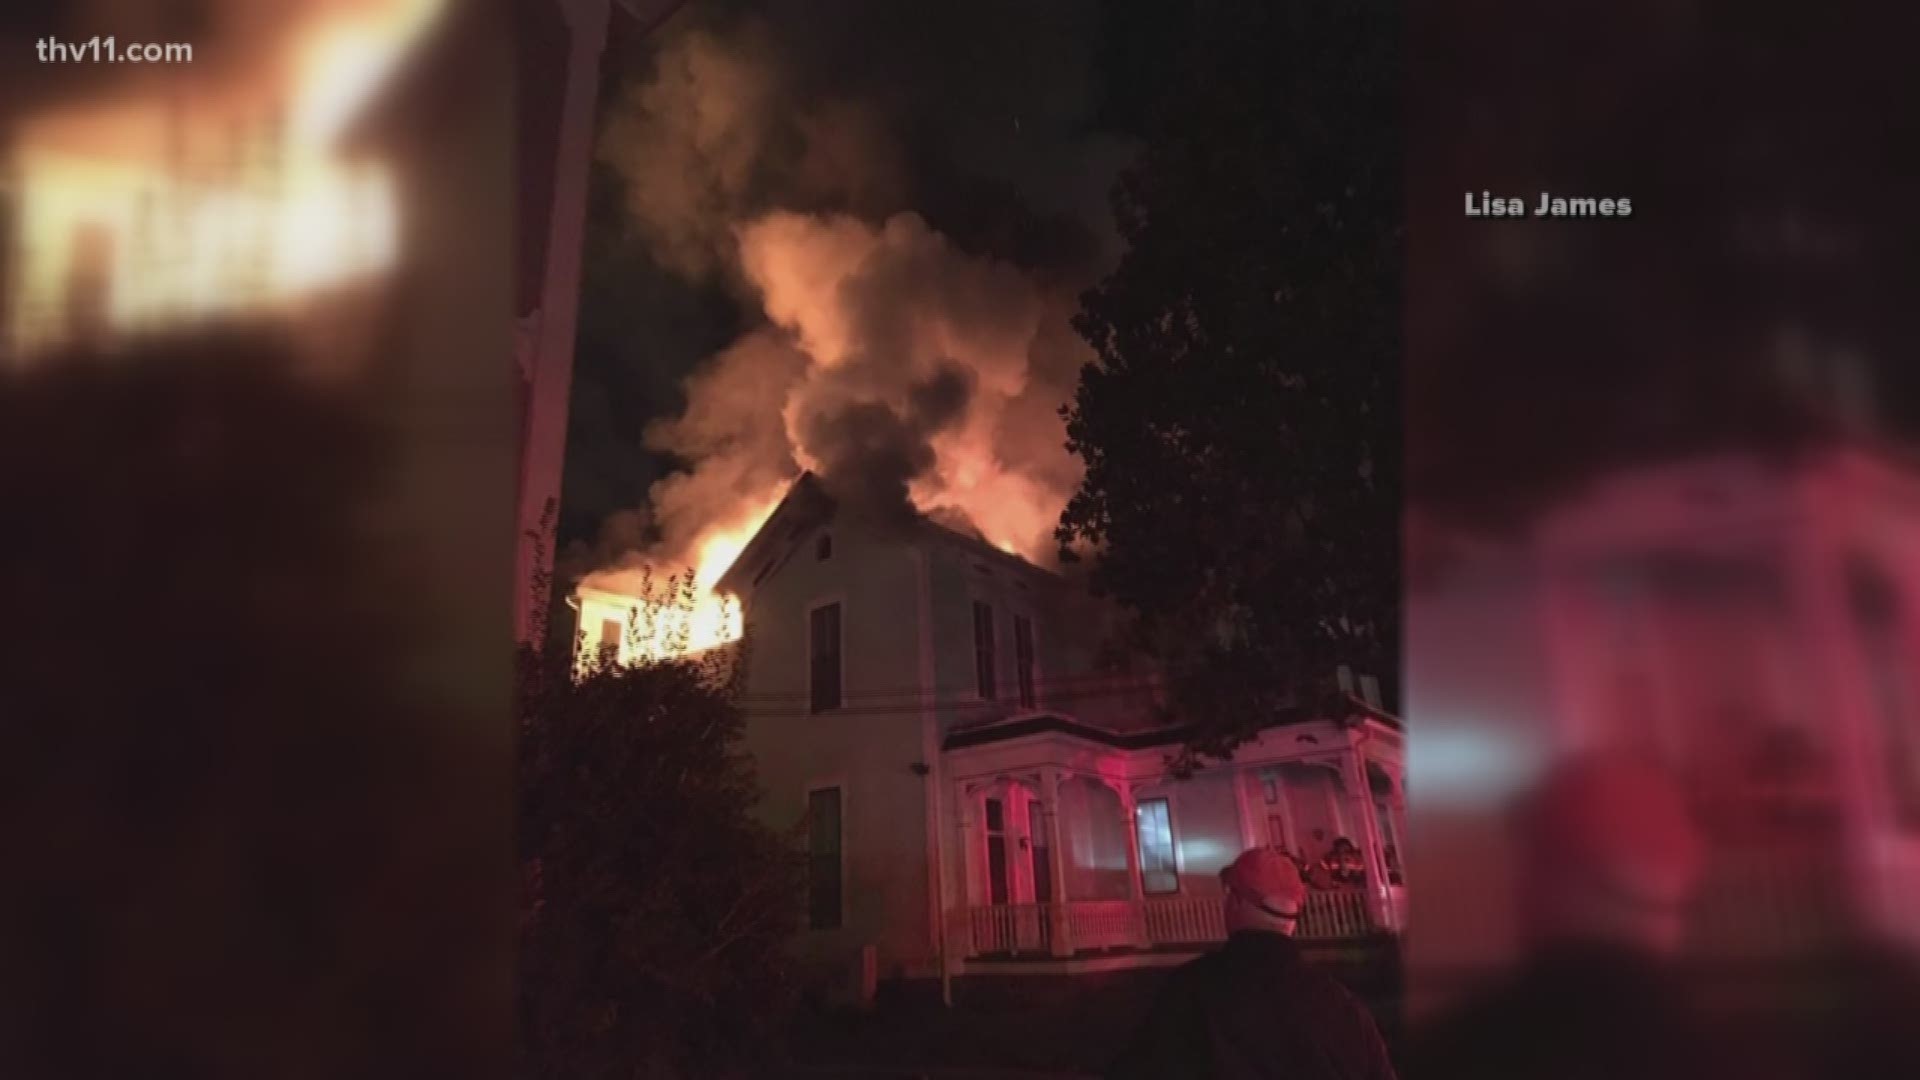 Several people are displaced after a little rock apartment building went up in flames last night.